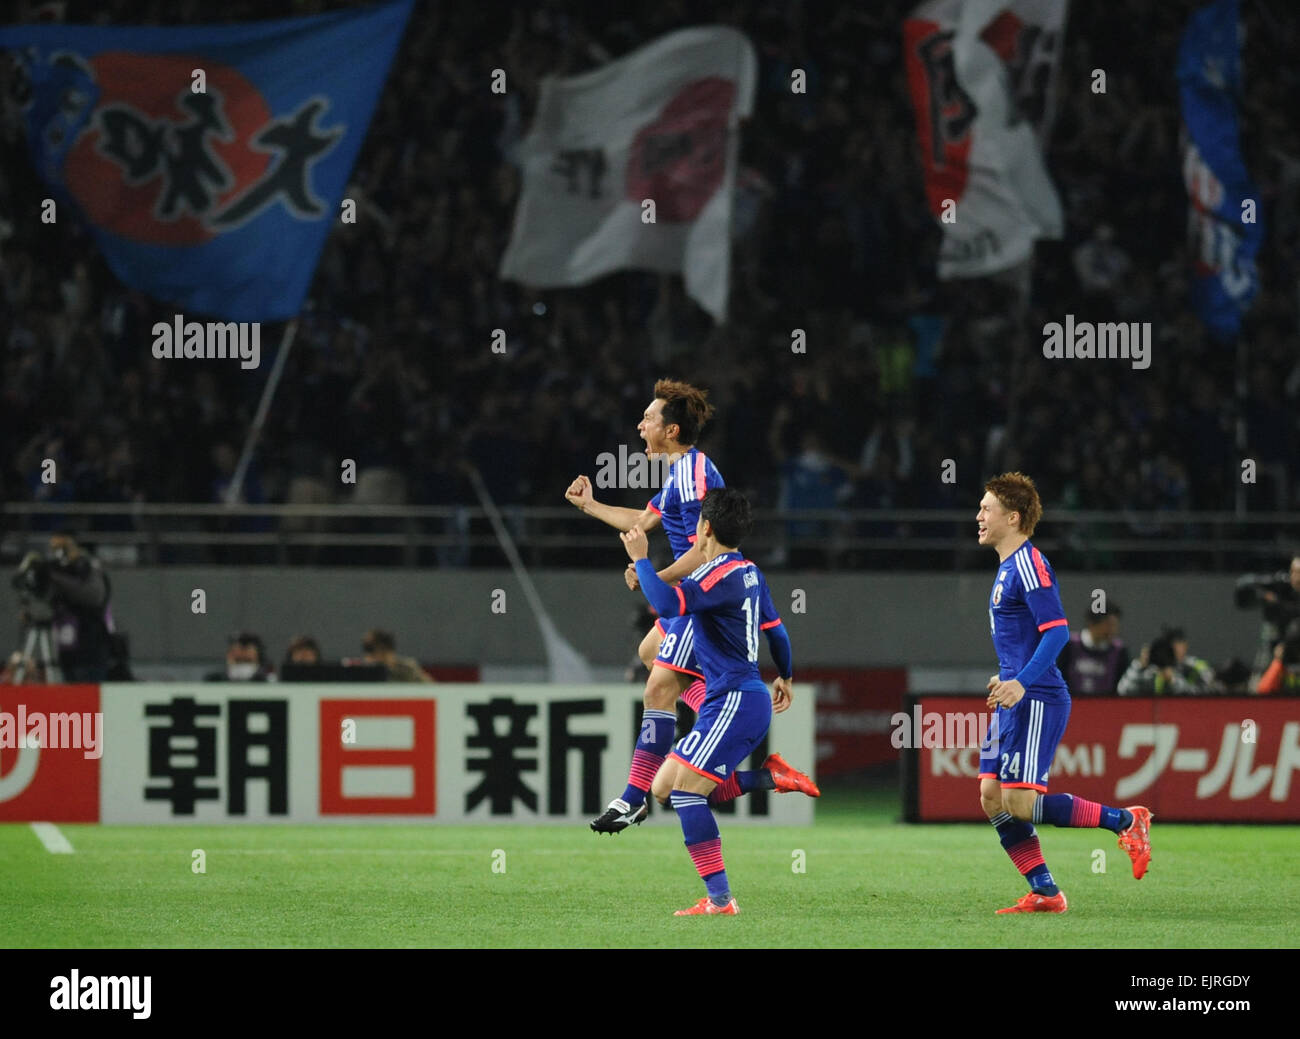 Tokyo, Japan. 31st Mar, 2015. Toshihiro Aoyama (Top) of Japan reacts after scoring against Uzbekistan during their JAL challenge cup 2015 in Tokyo, Japan, Mar. 31, 2015. © Stringer/Xinhua/Alamy Live News Stock Photo